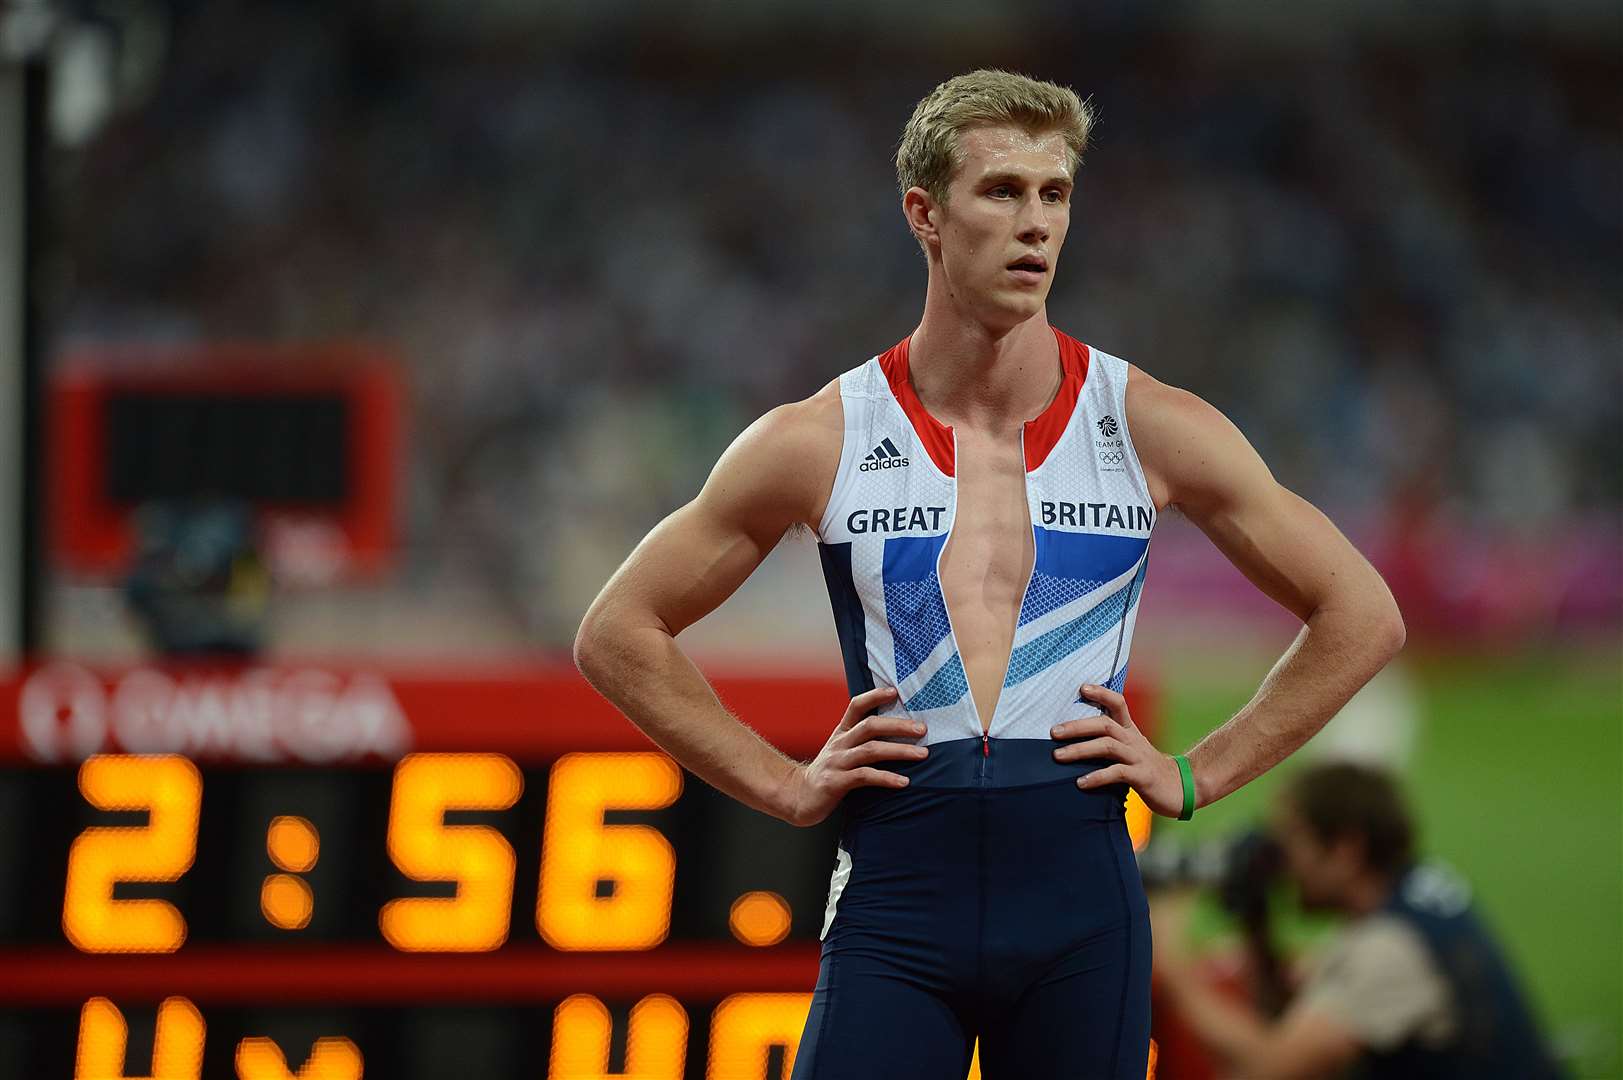 Jack Green in action for Team GB in the men's 4x400 relay final at the 2012 Olympics Picture: Barry Goodwin